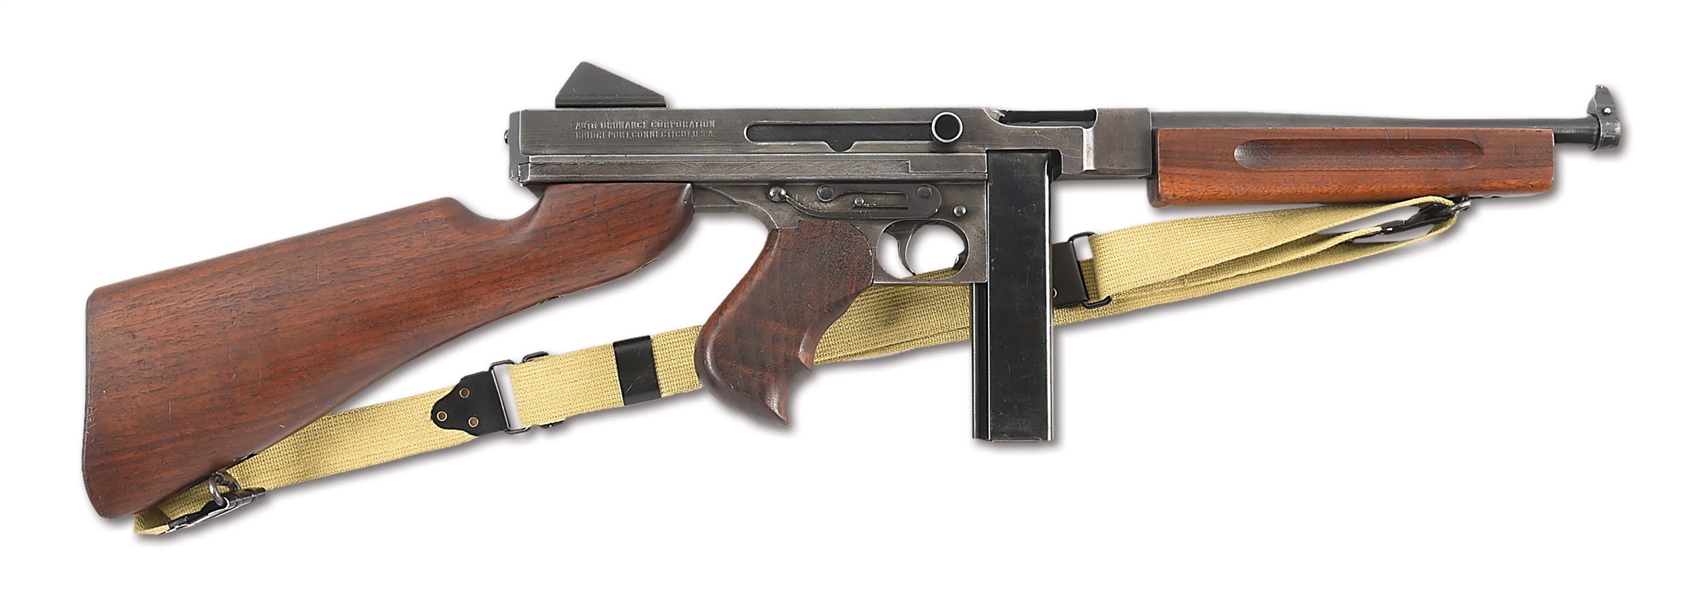 (N) HIGHLY DESIRABLE ORIGINAL SAVAGE MANUFACTURED M1A1 THOMPSON MACHINE (CURIO AND RELIC).